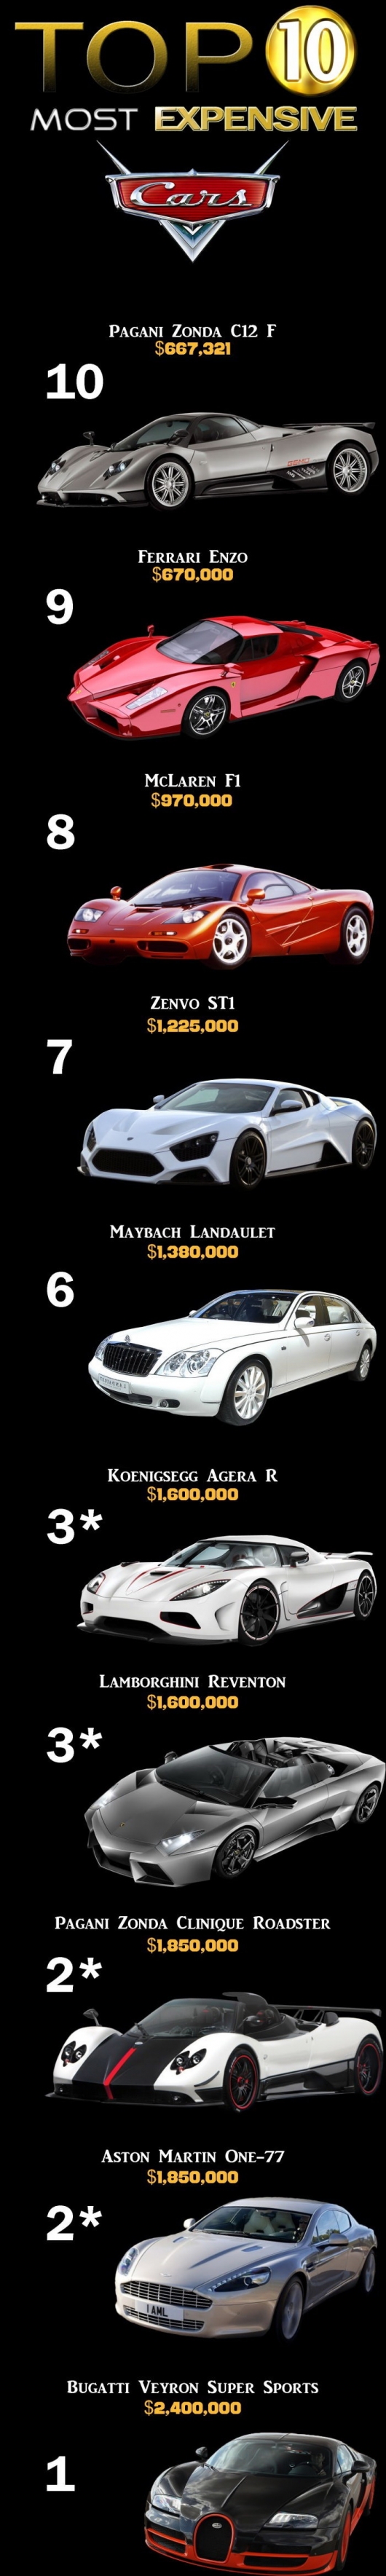 Top most expensive cars